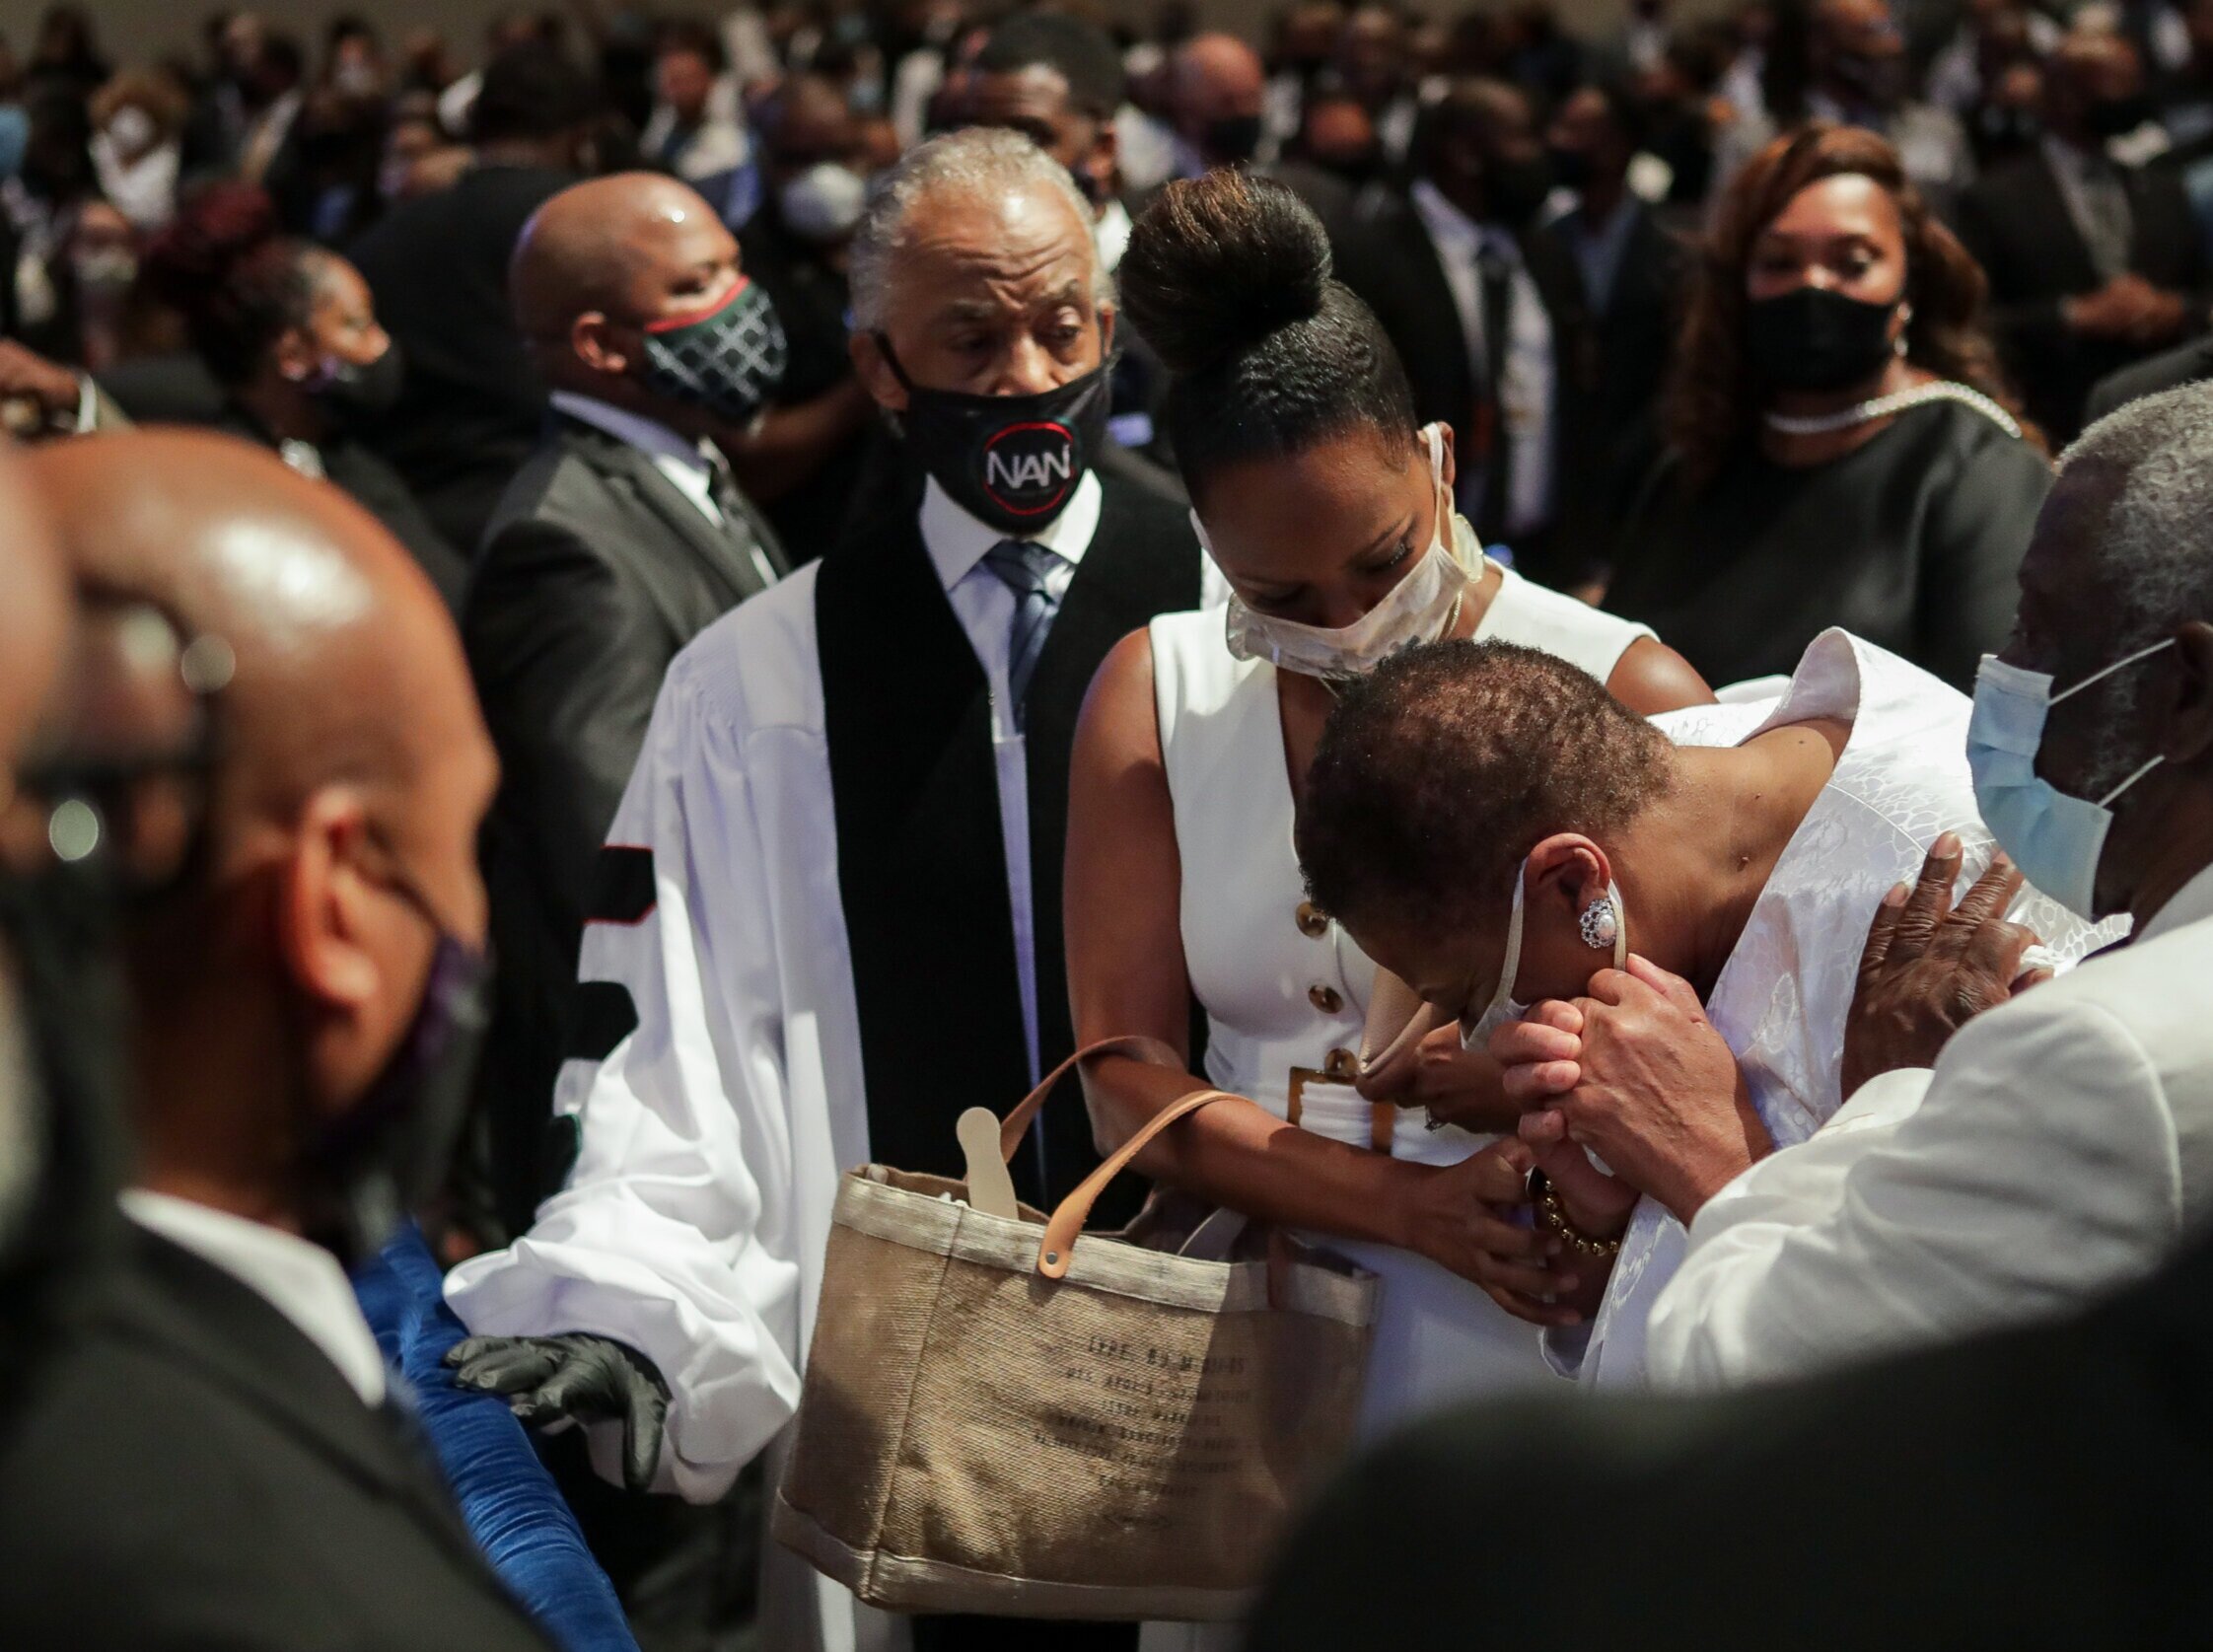  Mourners react as they look at the casket as the extended family processes into the funeral for George Floyd at The Fountain of Praise church on Tuesday, June 9, 2020, in Houston, Texas. Floyd died while in custody of the Minneapolis Police Departme